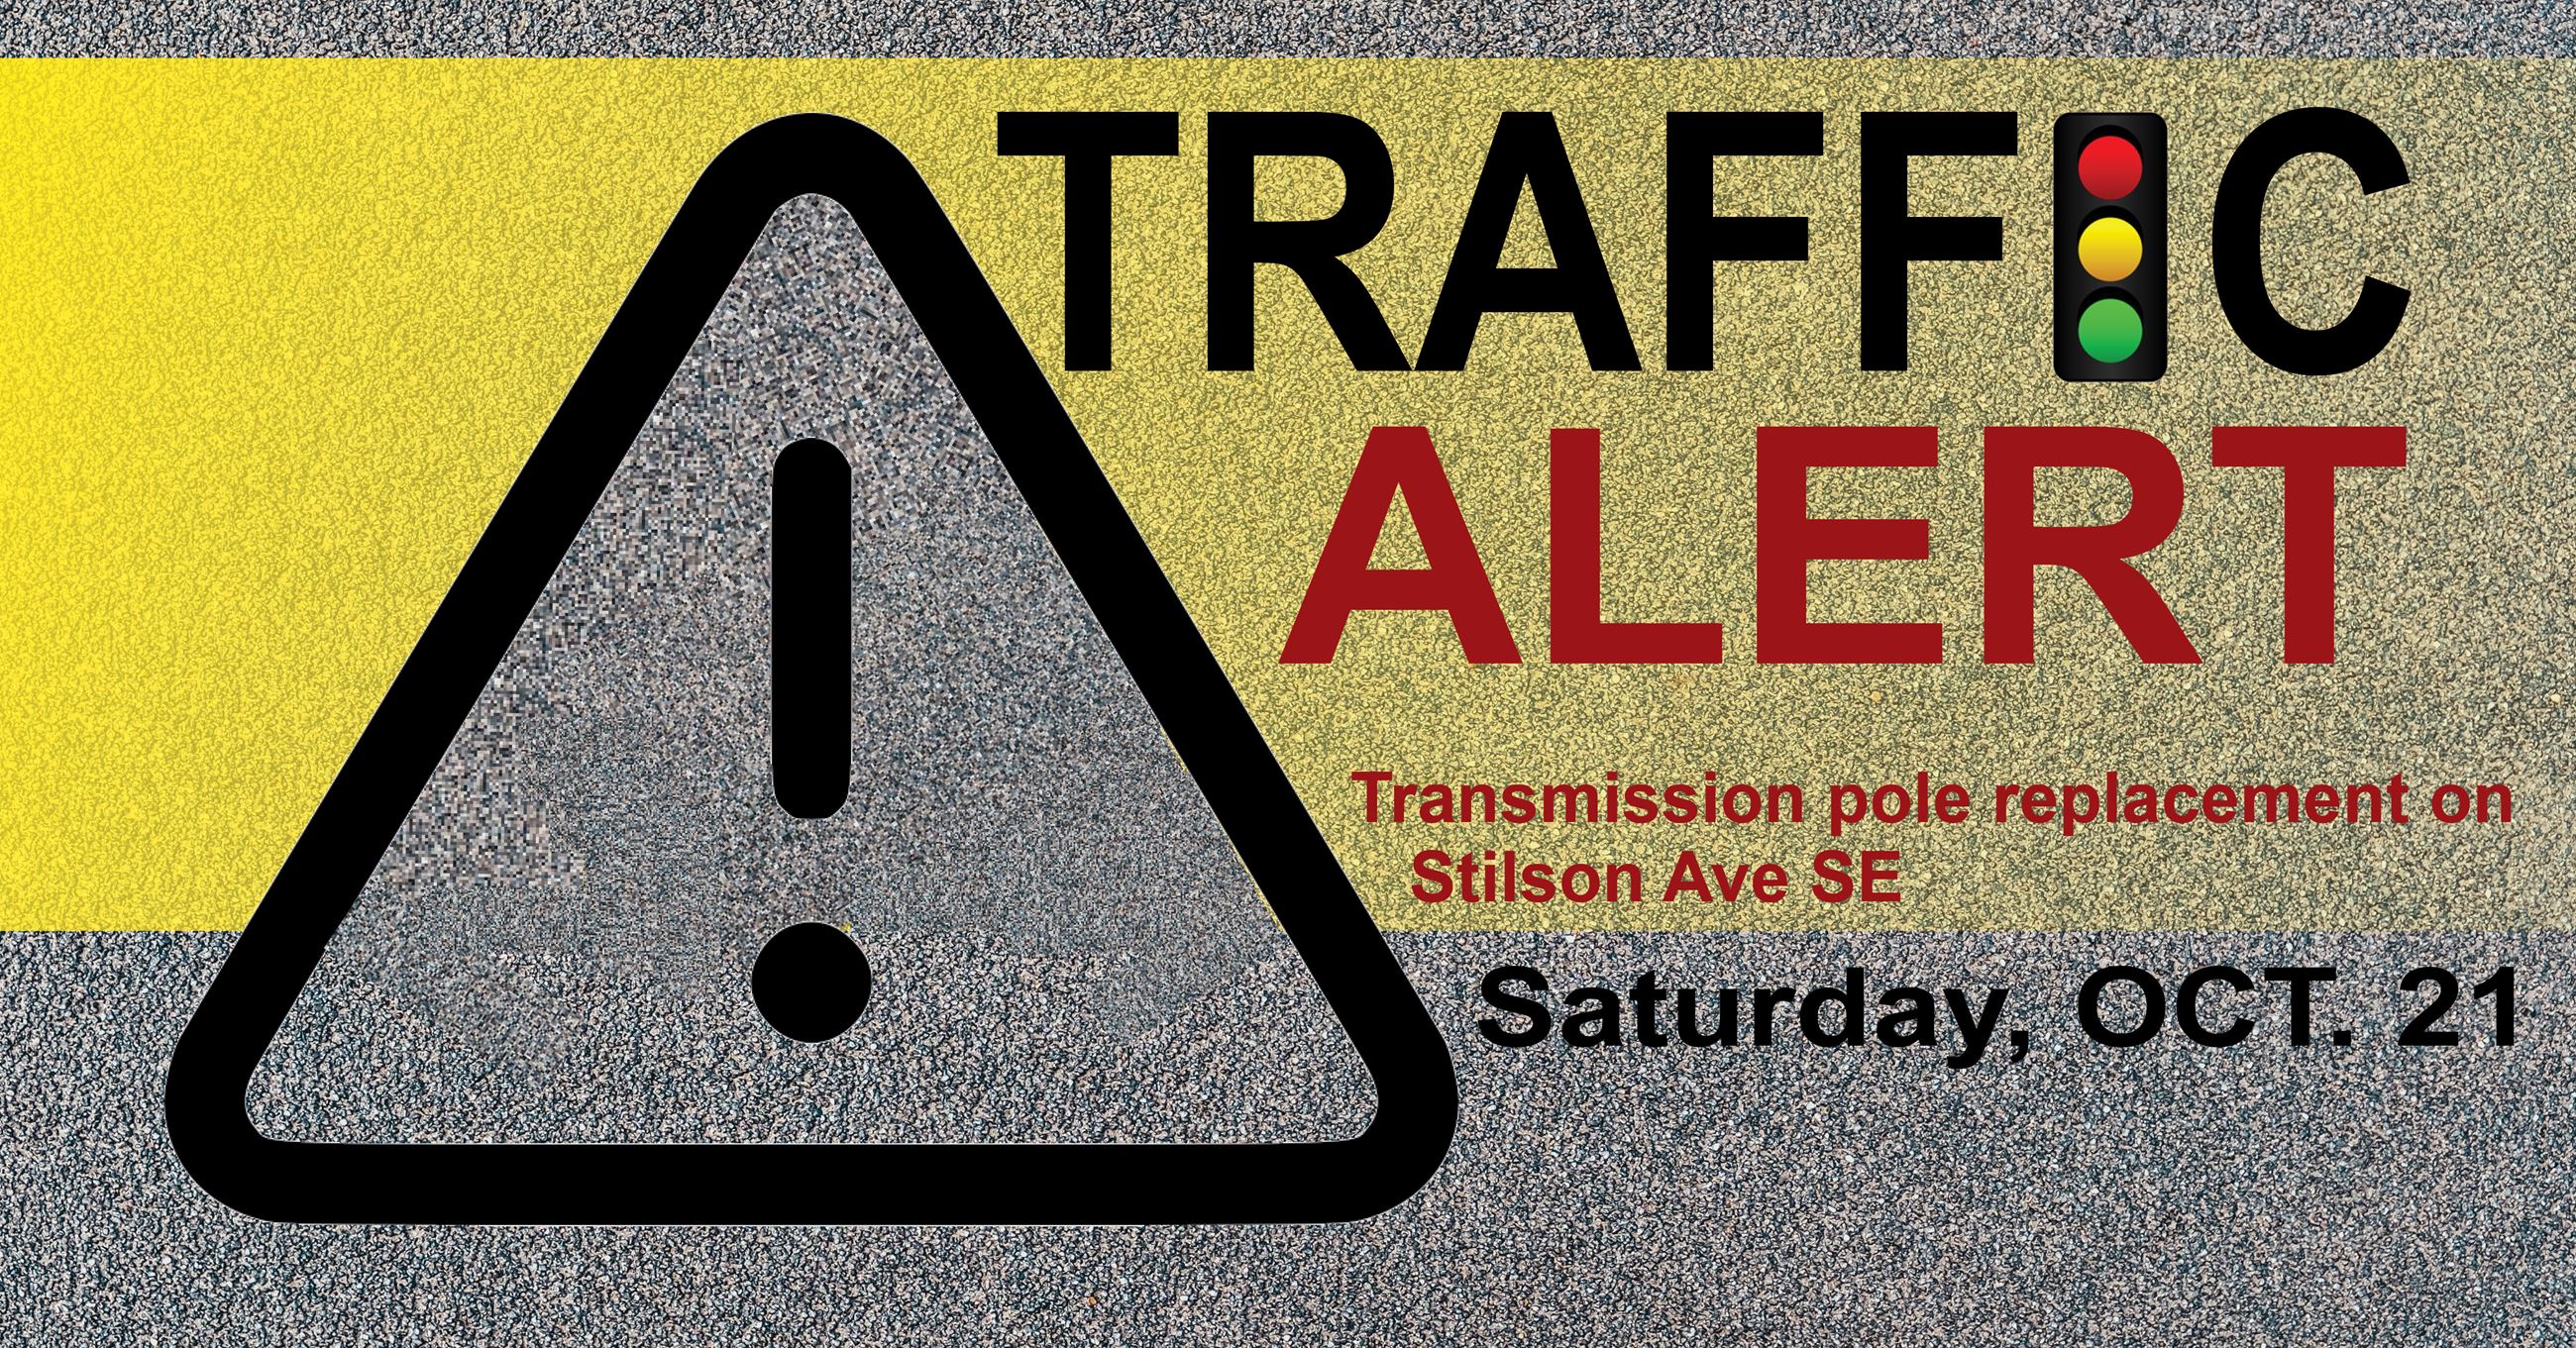  Traffic Alert: Transmission pole replacement scheduled for a portion of Stilson Avenue on October 21 